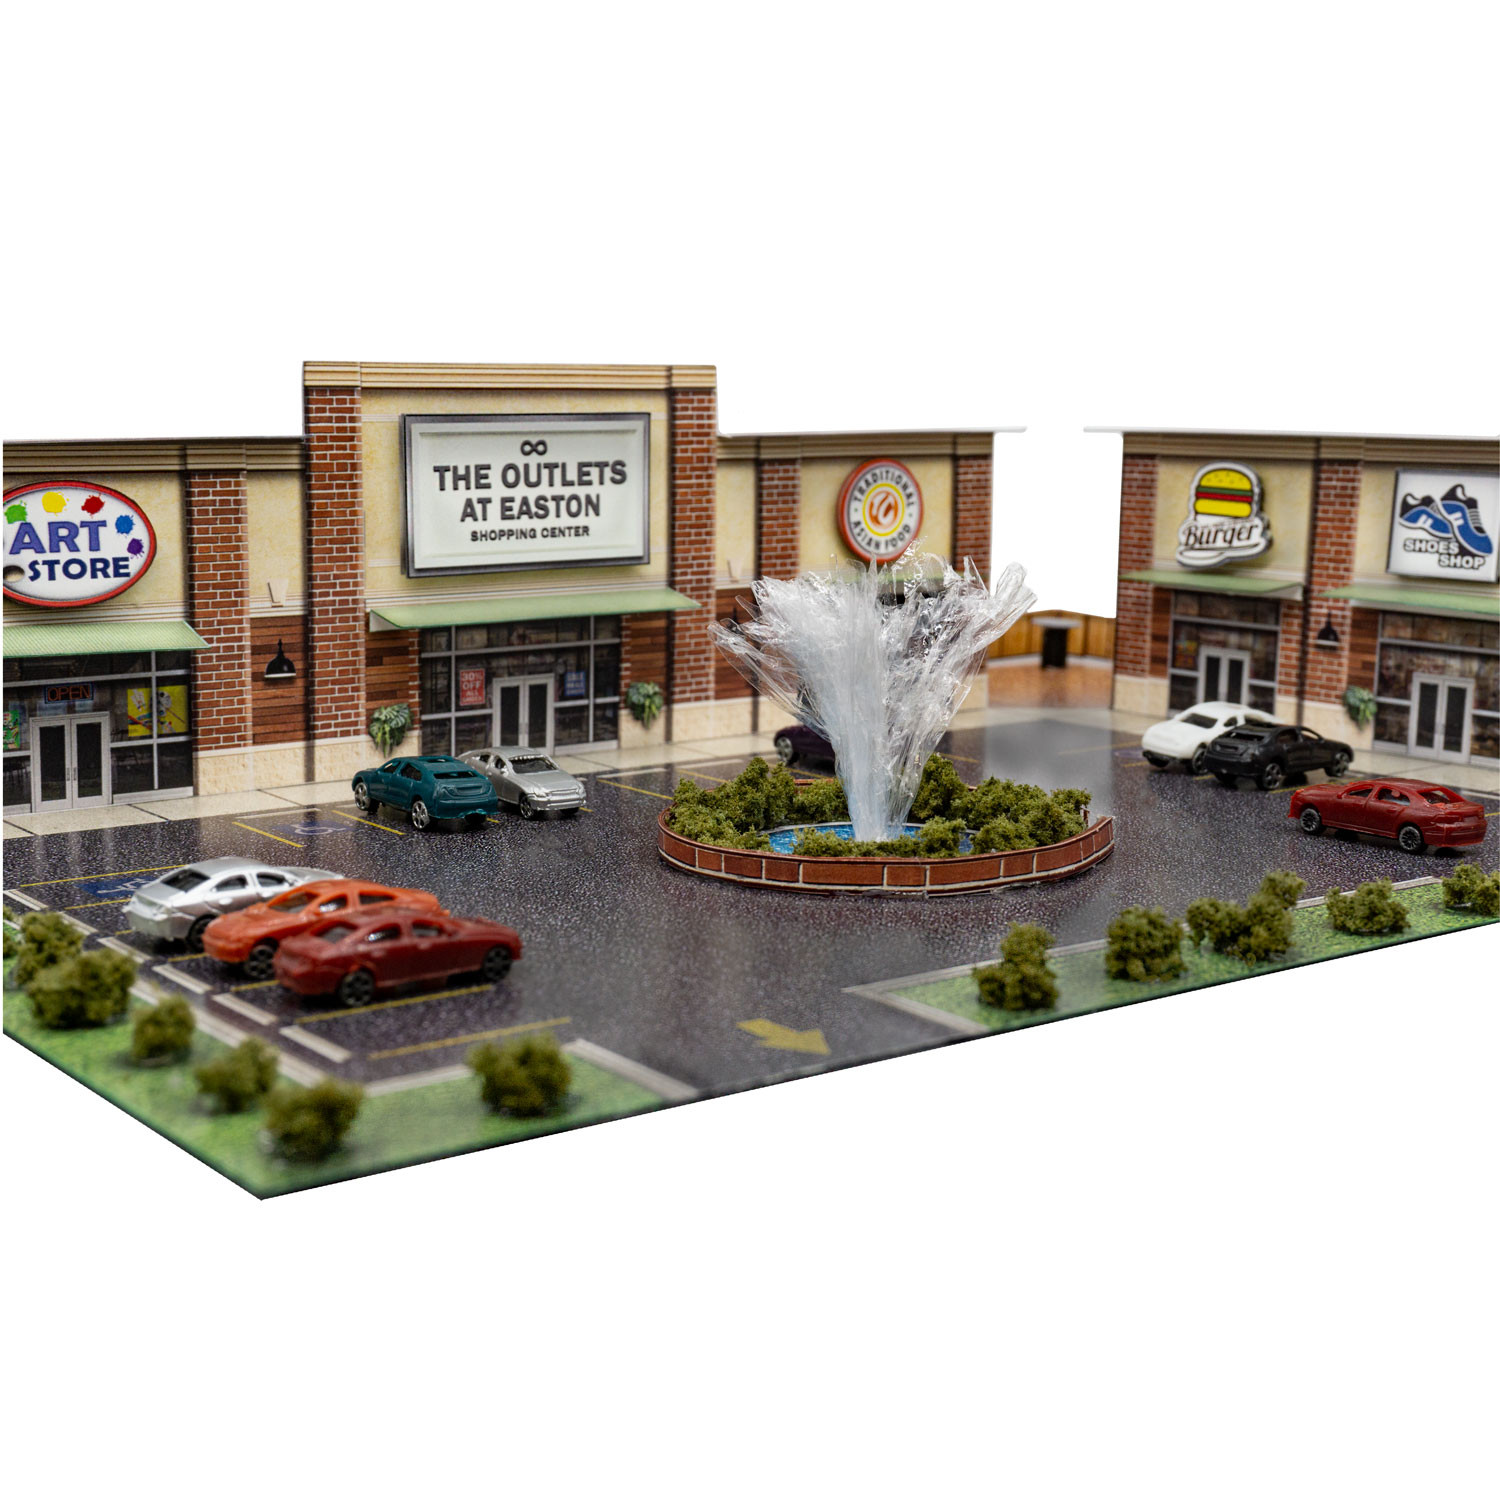 BK 2105 1:220 Z Scale "Outlet Mall" Photo Real Scale Building Kit